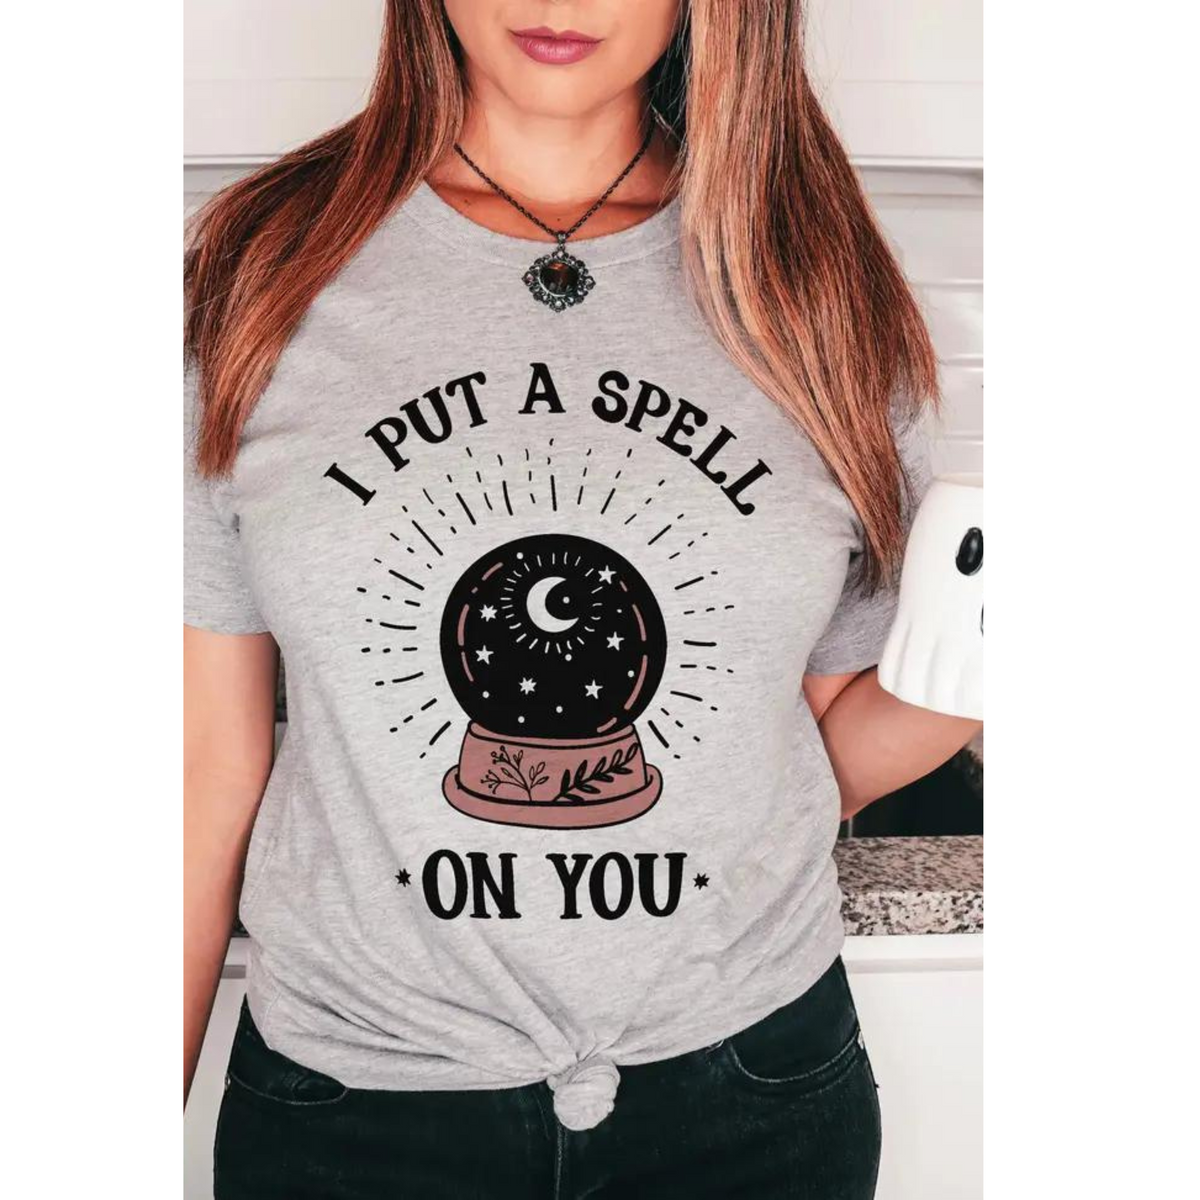 Spell On You Tee